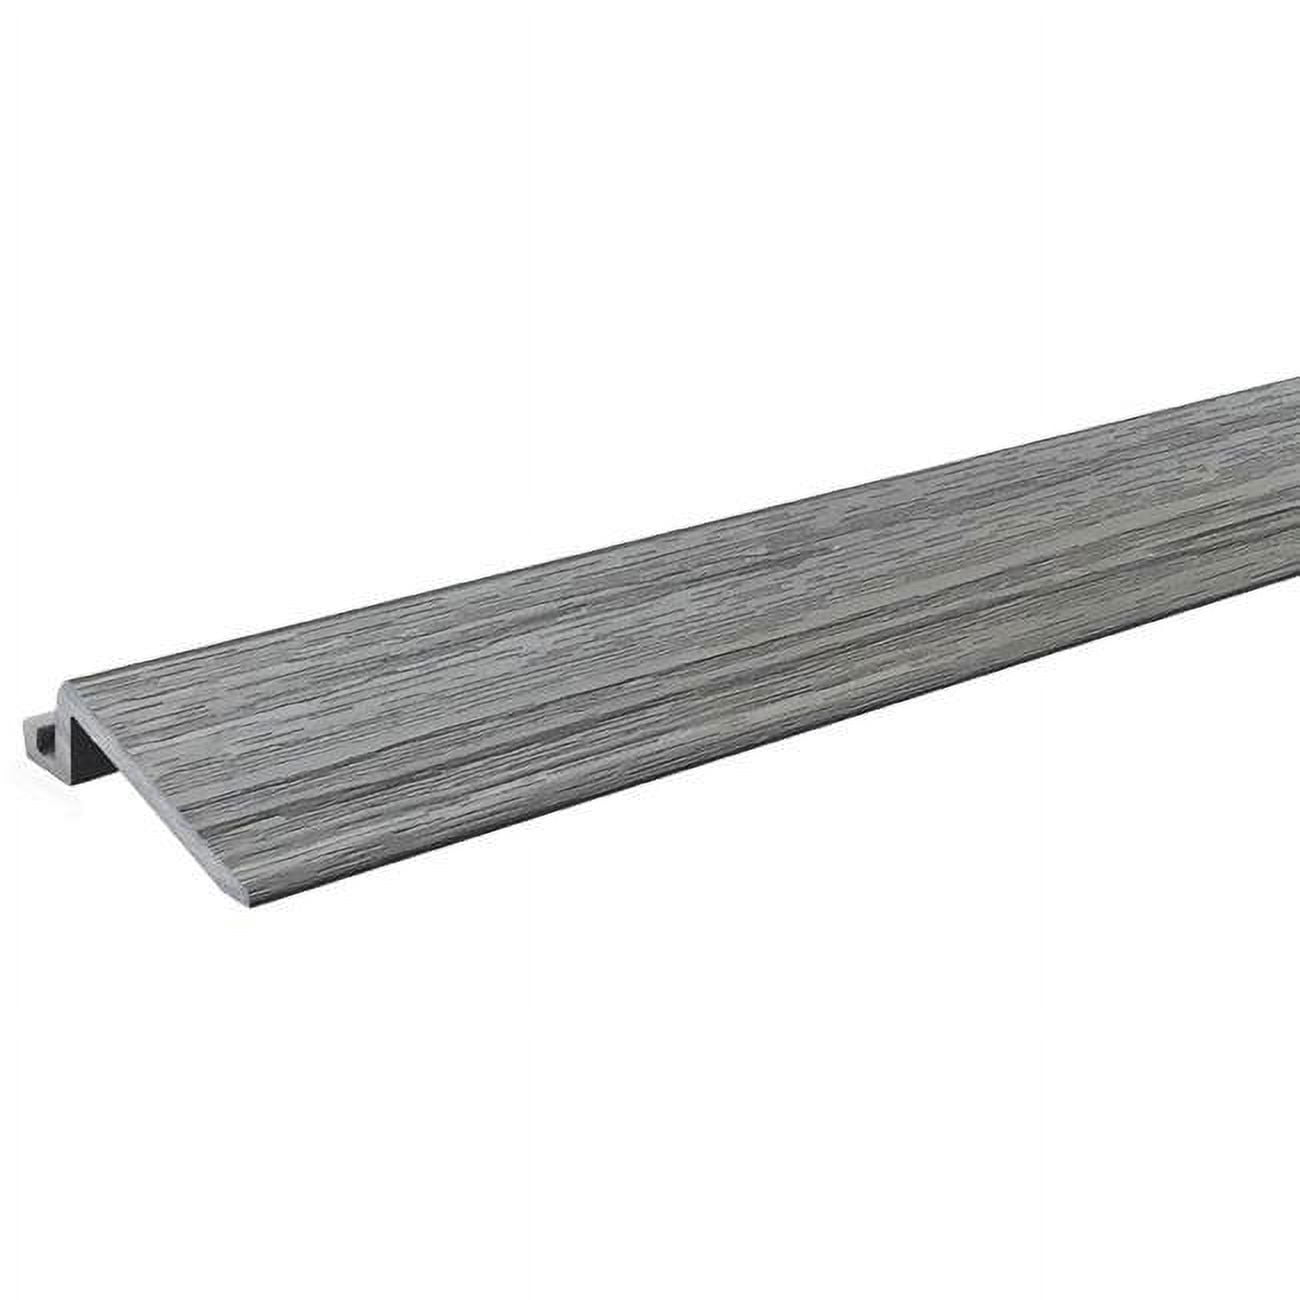 5011912 3 X 24 In. Prefinished Gray Oak Pvc Floor Transition - Pack Of 4